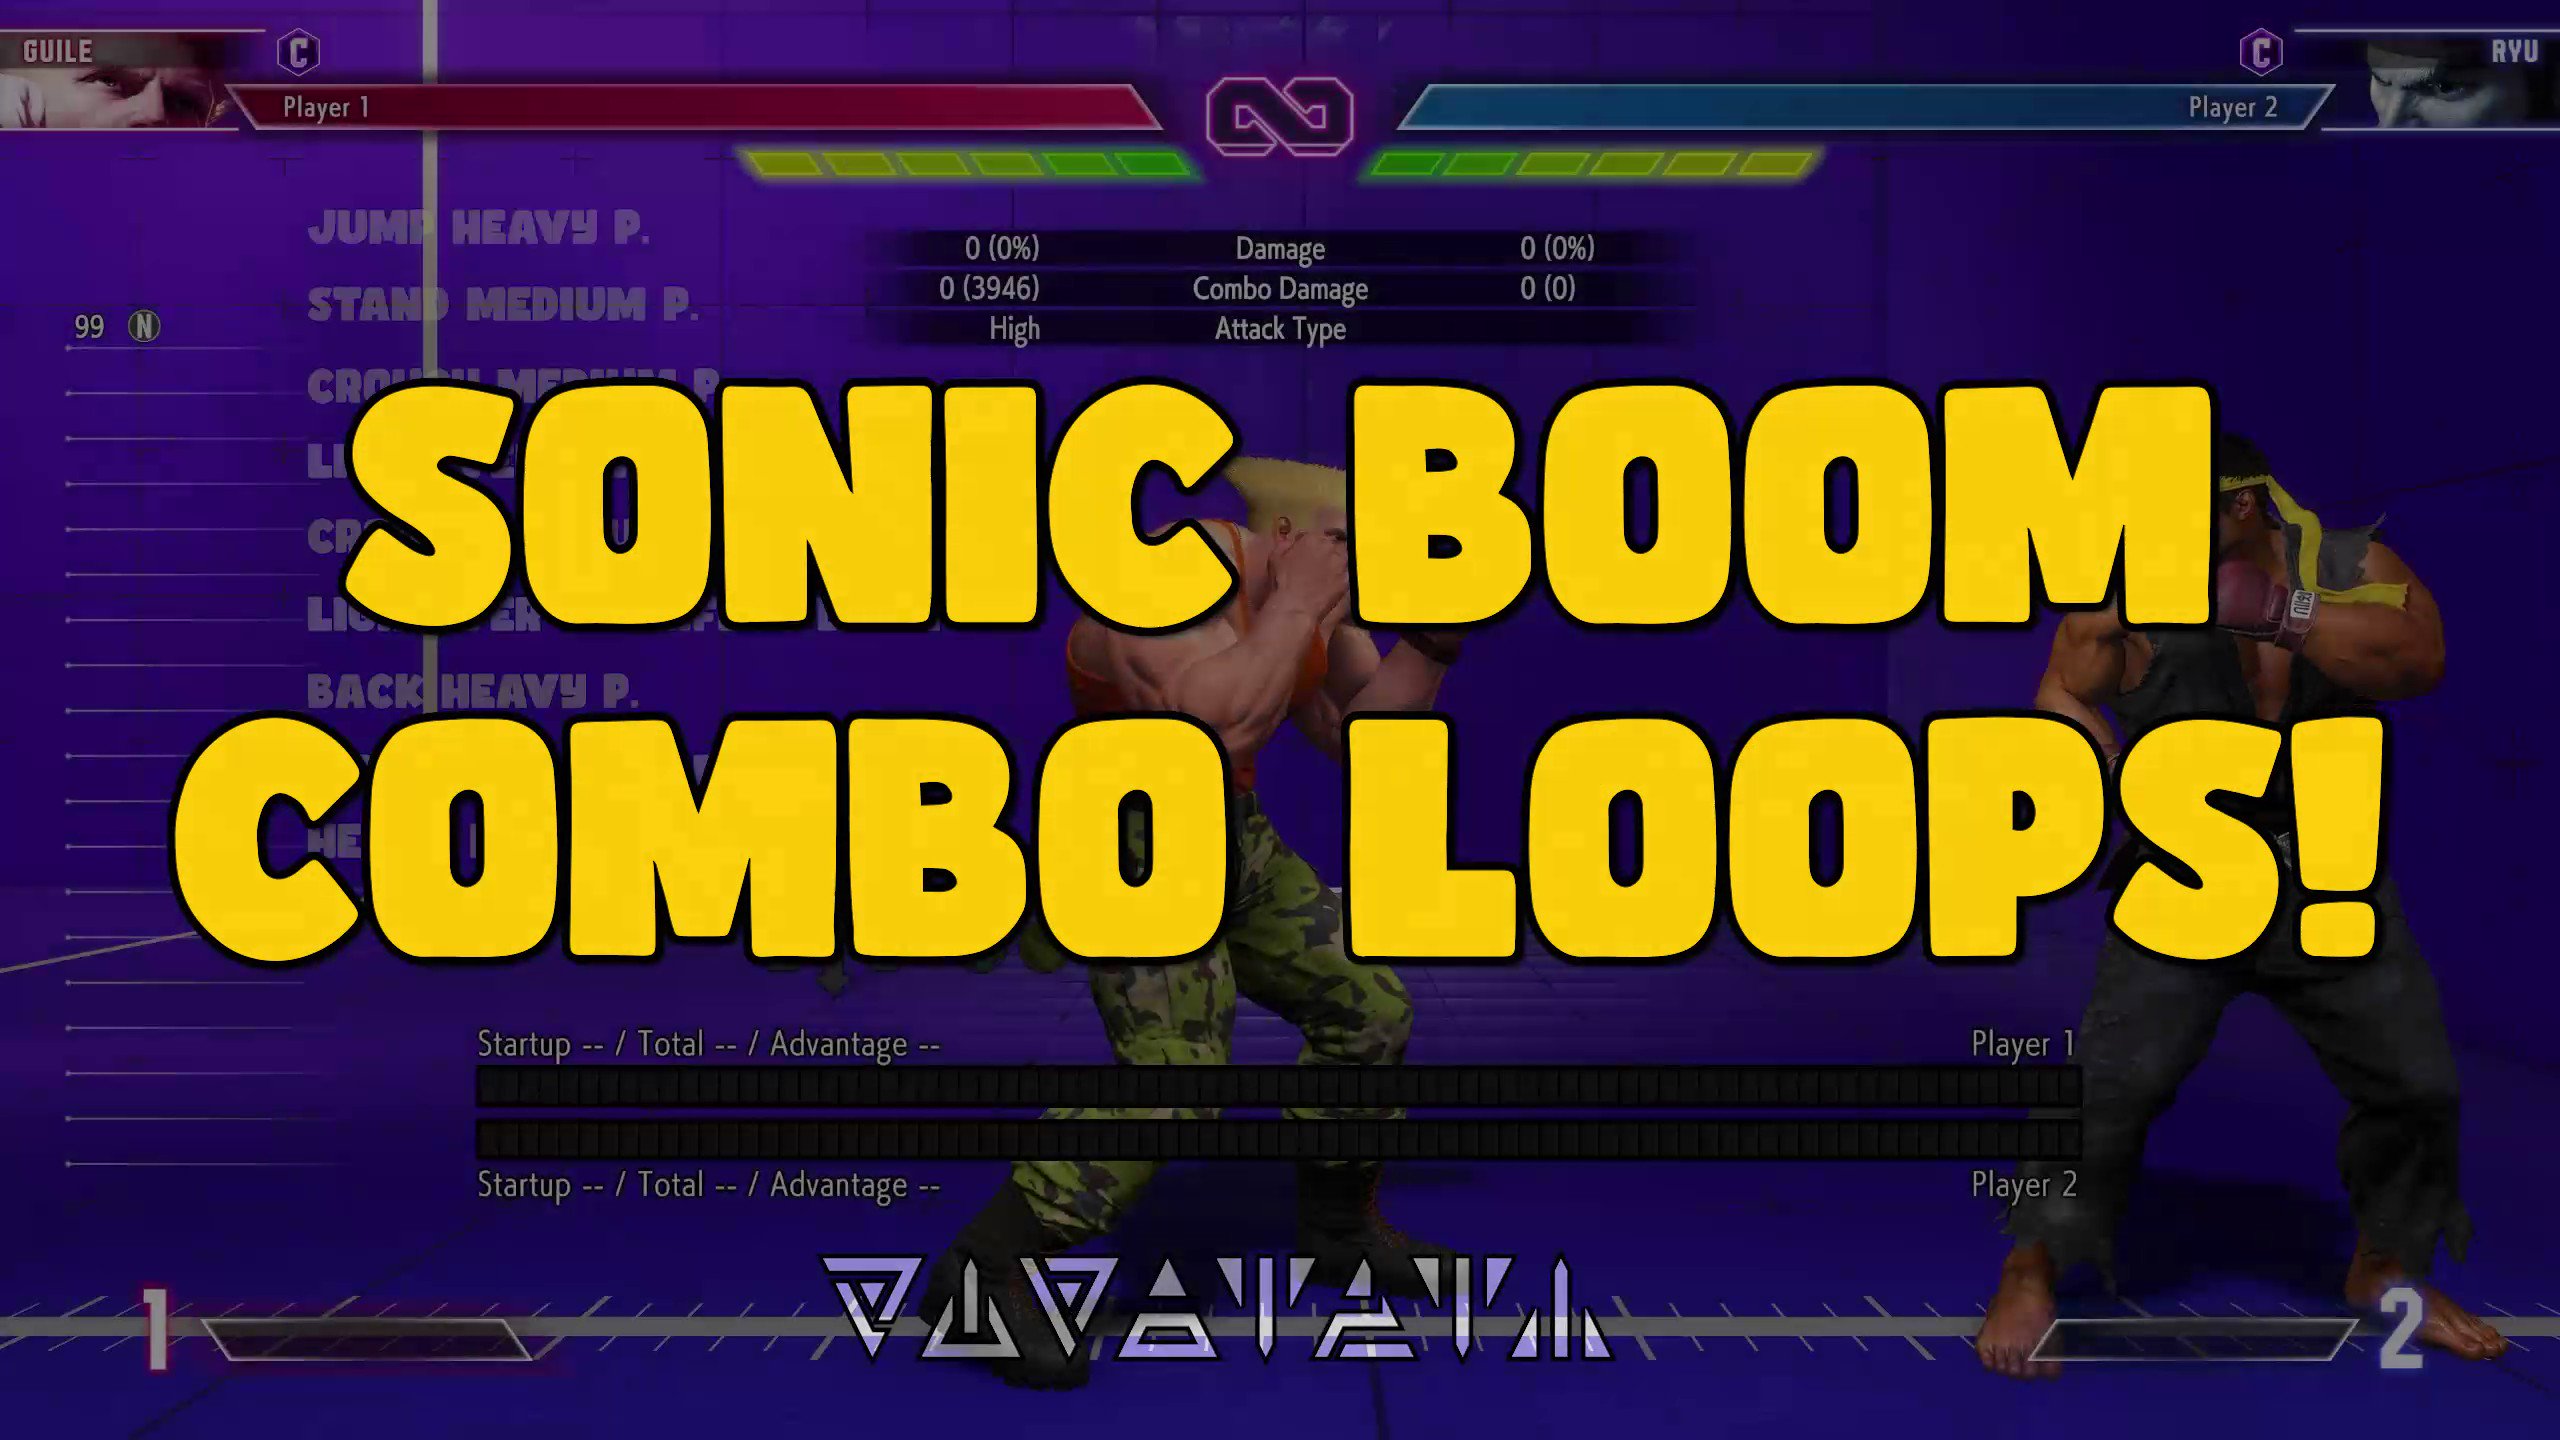 NurseLee on X: SF6: Guile Combos, Sonic Boom Loops - This route, seems to  be the most Universal & Optimal Sonic Boom Loop to learn. - It works  mostly on Everyone. 